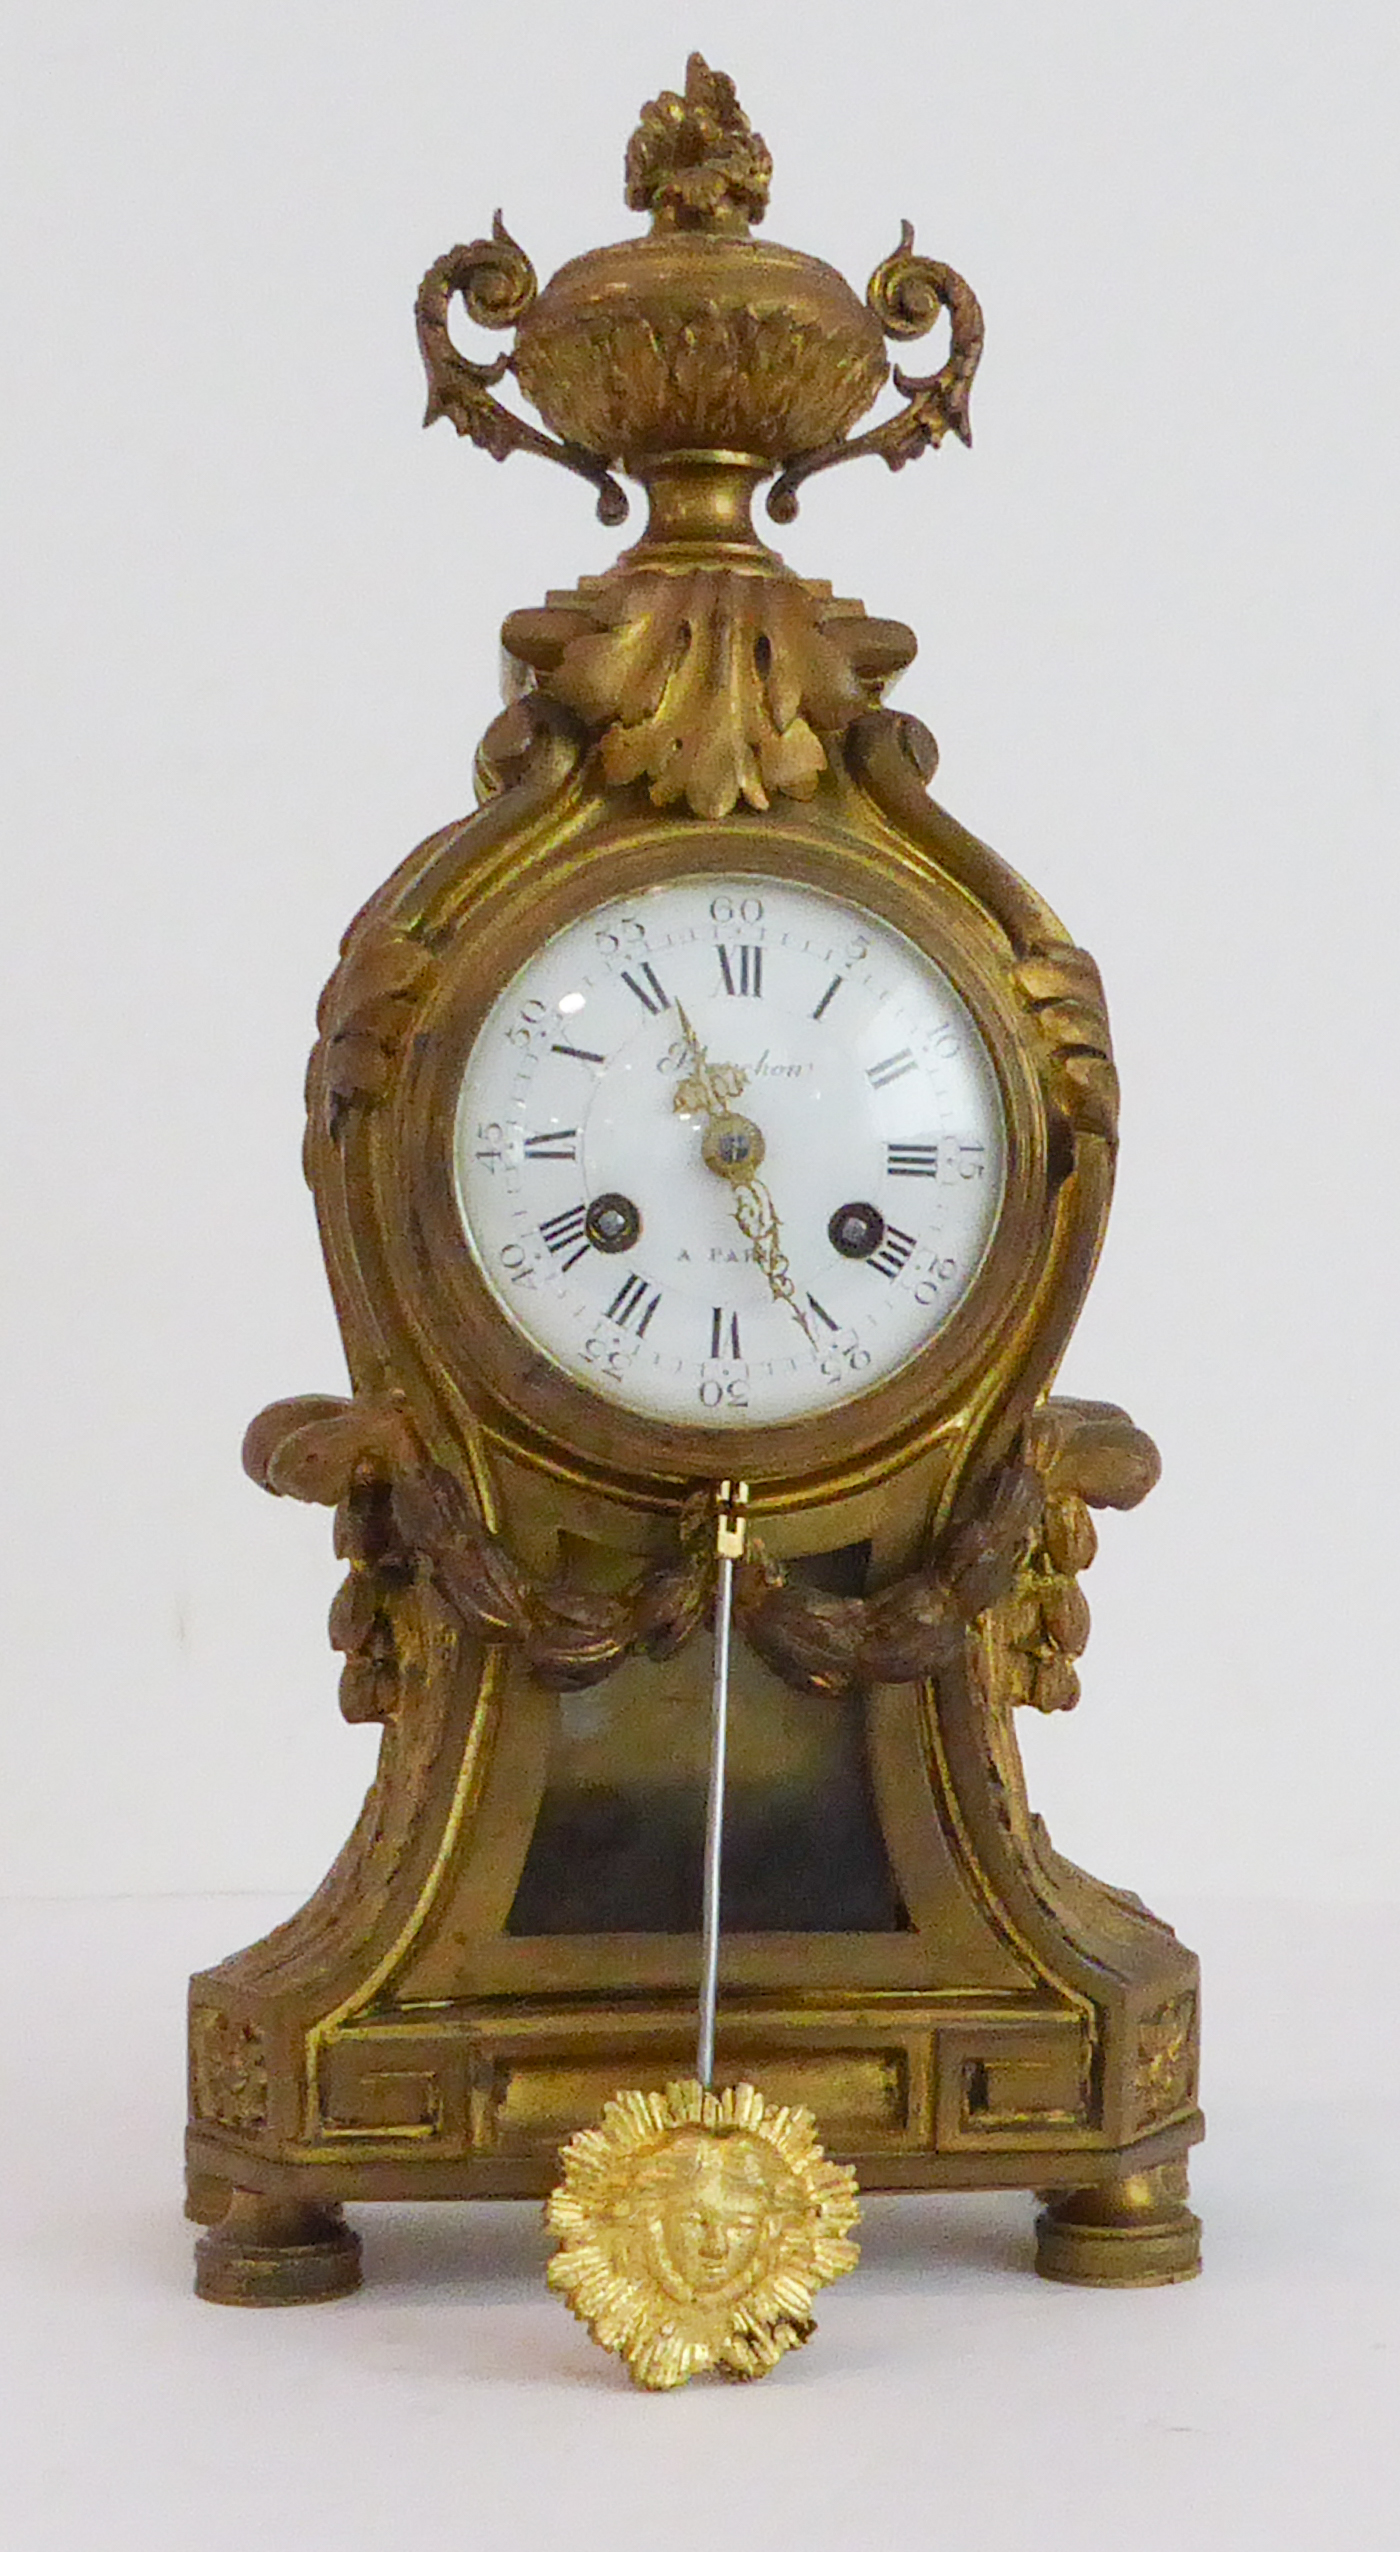 A 19th century French gilt-metal-cased eight-day mantle clock in Louis XVI style. The two-handled